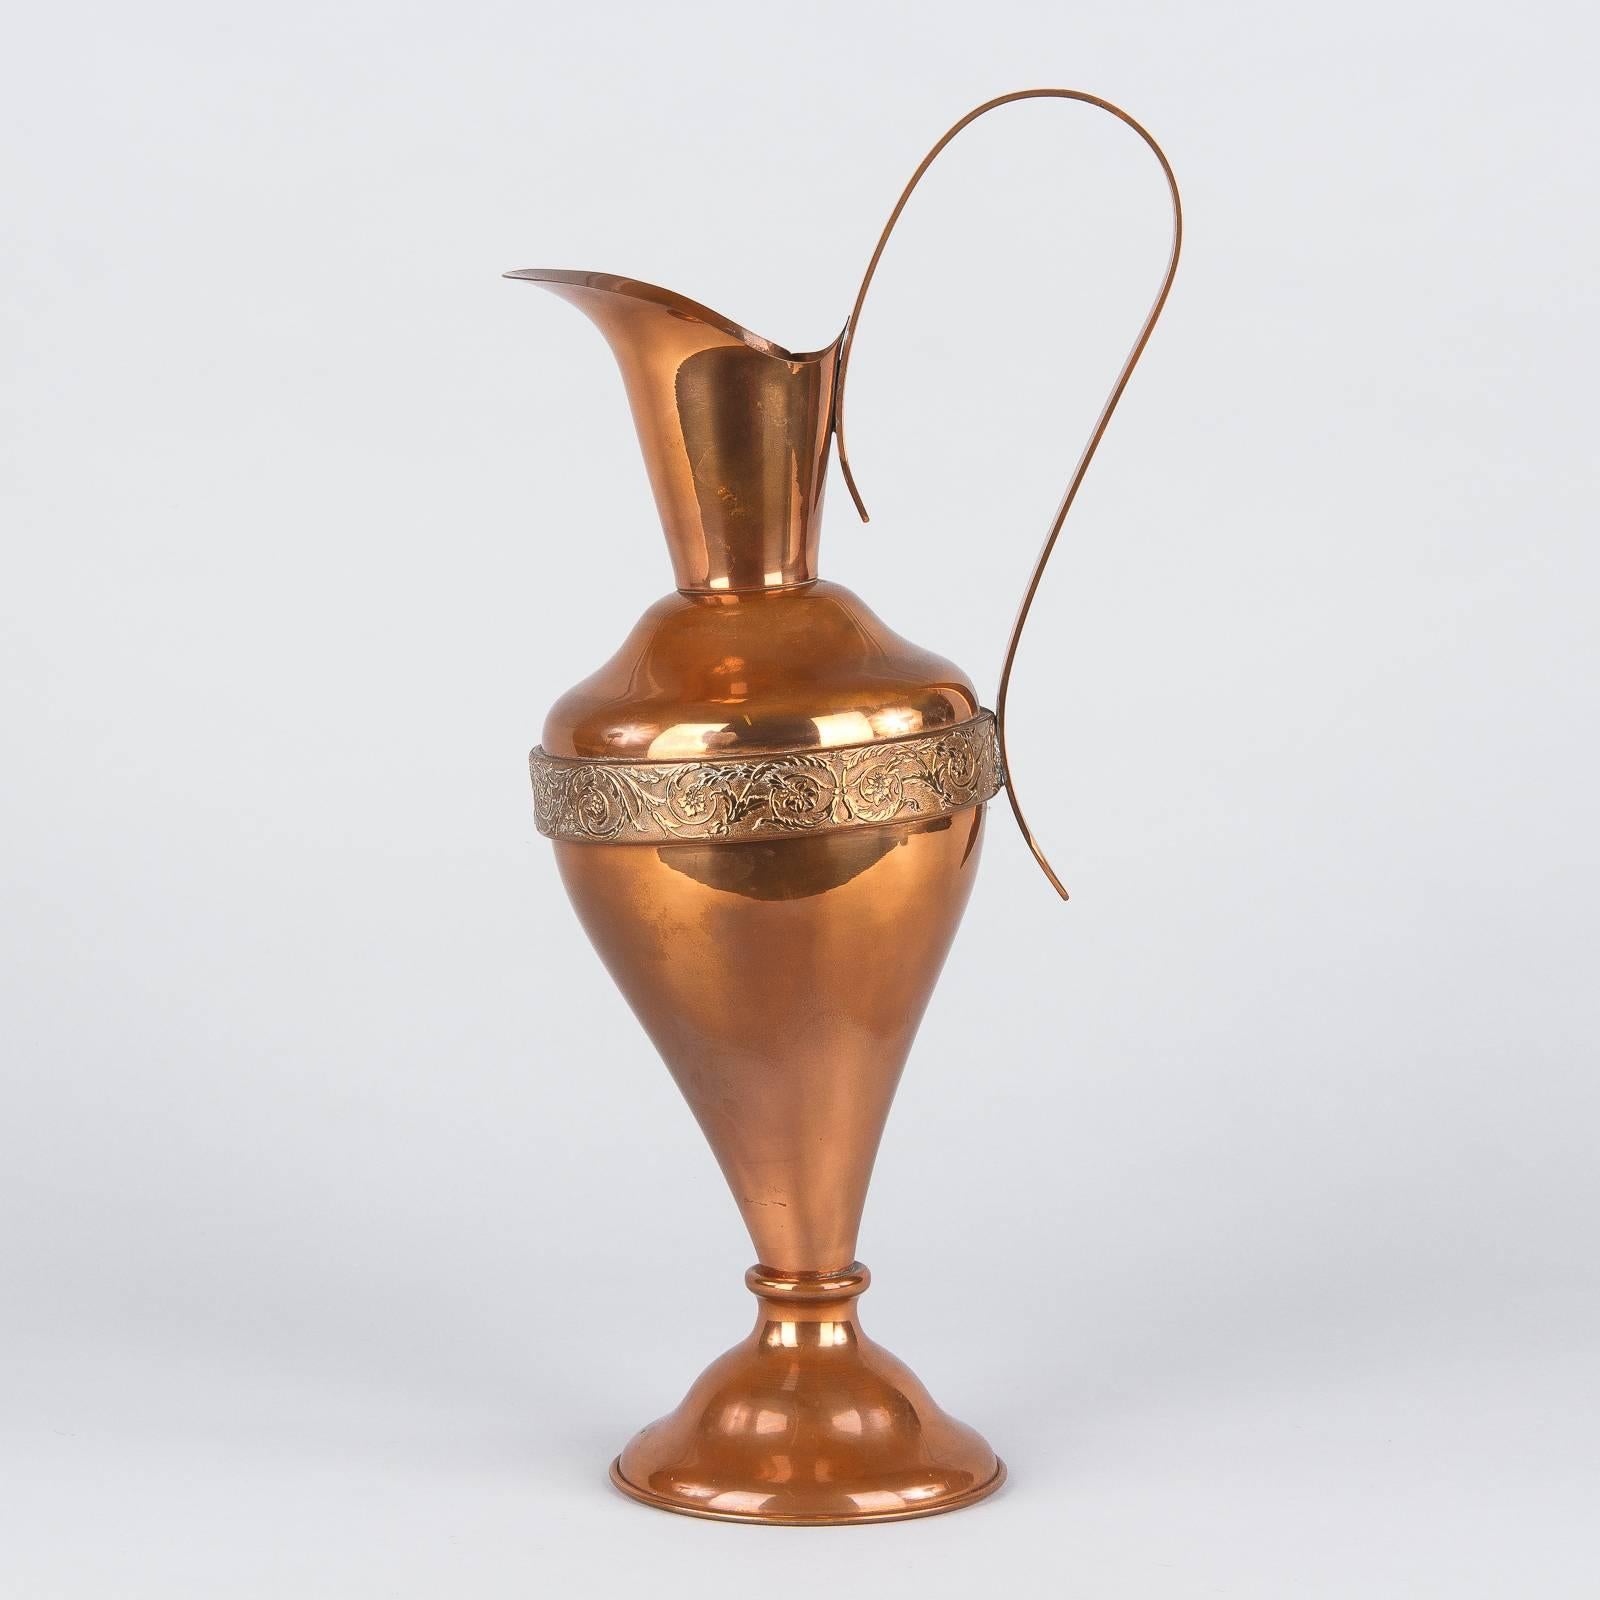 20th Century French Copper Slanted Ewer Pitcher by Villedieu Gaor, 1950s For Sale